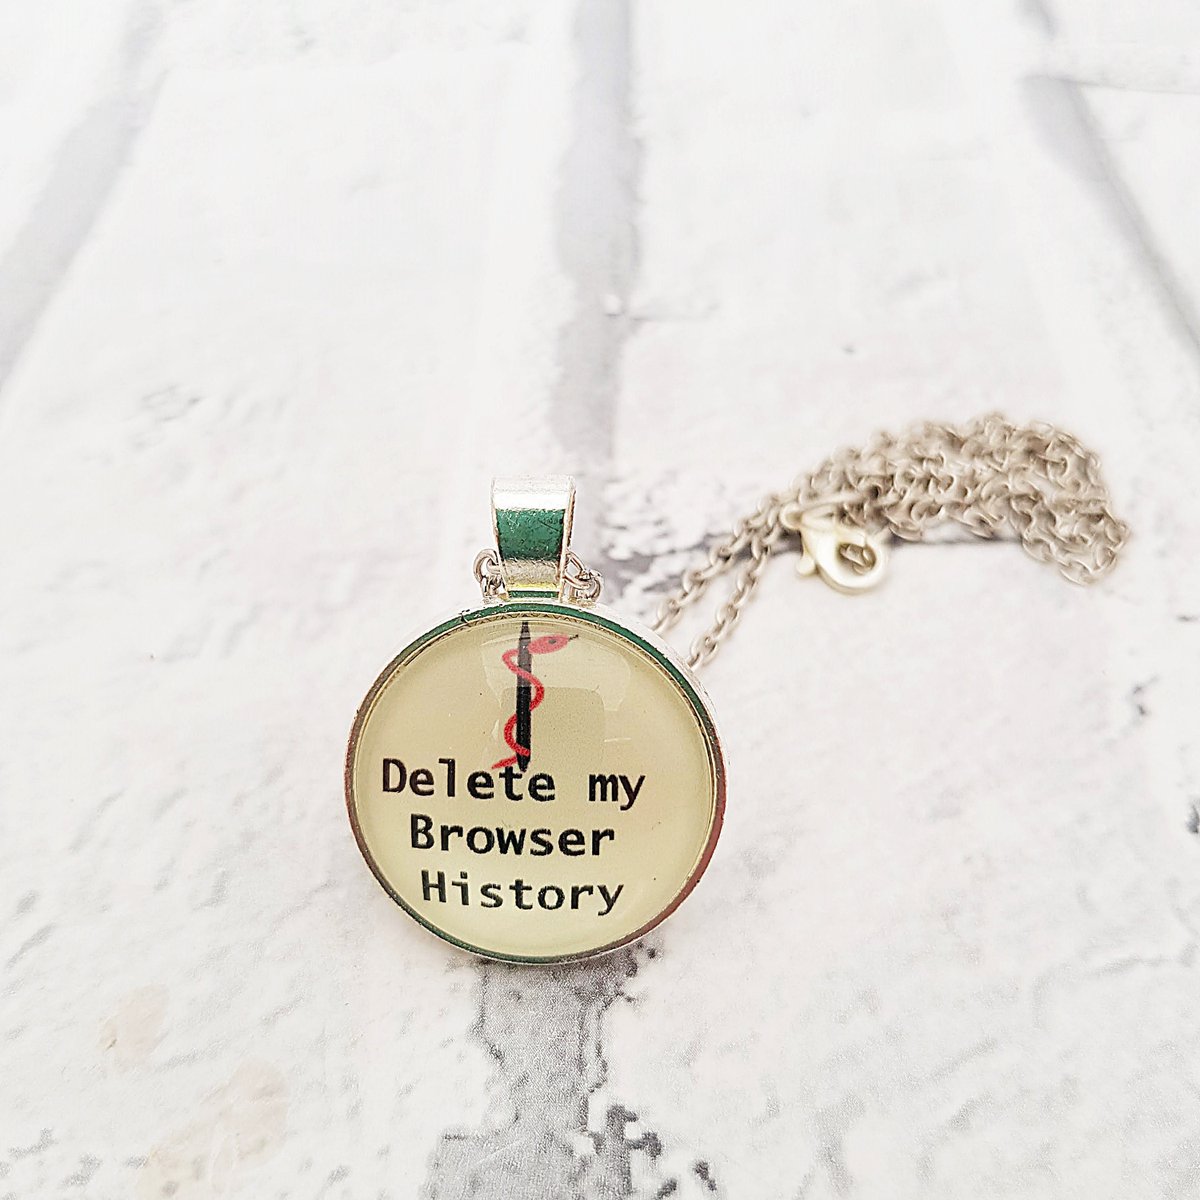 Delete my browser history necklace, geeky gift, medical alert pendant, funny gag gift, novelty necklace, coworker gift, nerdy gift, Q1 tuppu.net/95bbcce8 #SMILEtt23 #Shopsmall #Etsy #Handmade #CoworkerGift